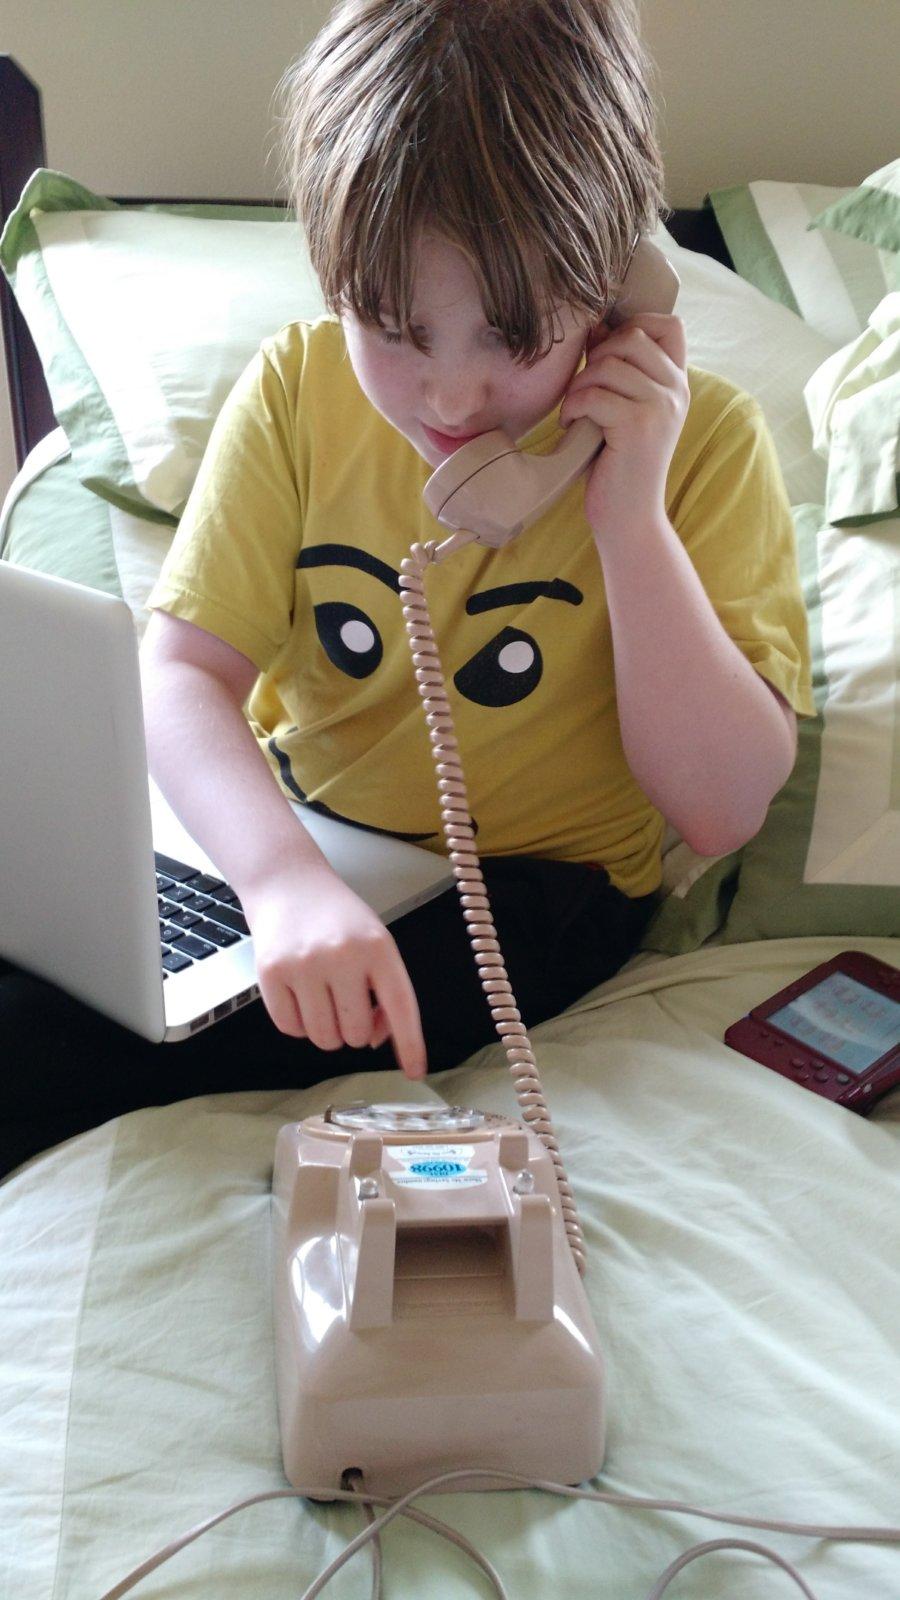 The children indulged me by dialing the rotary phone.